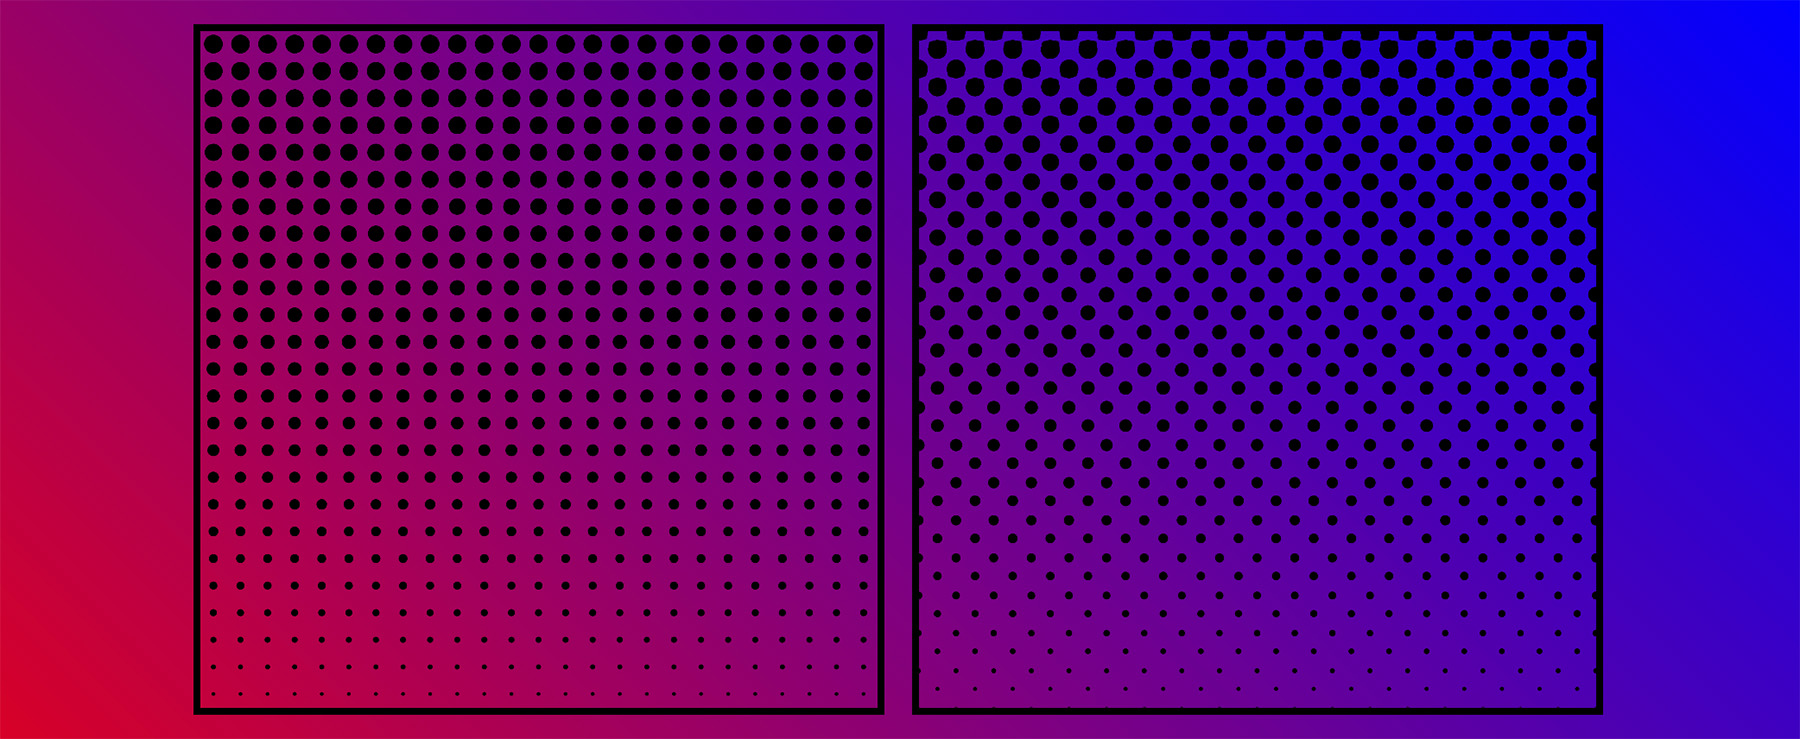 The two halftone patterns on a red to blue gradient background